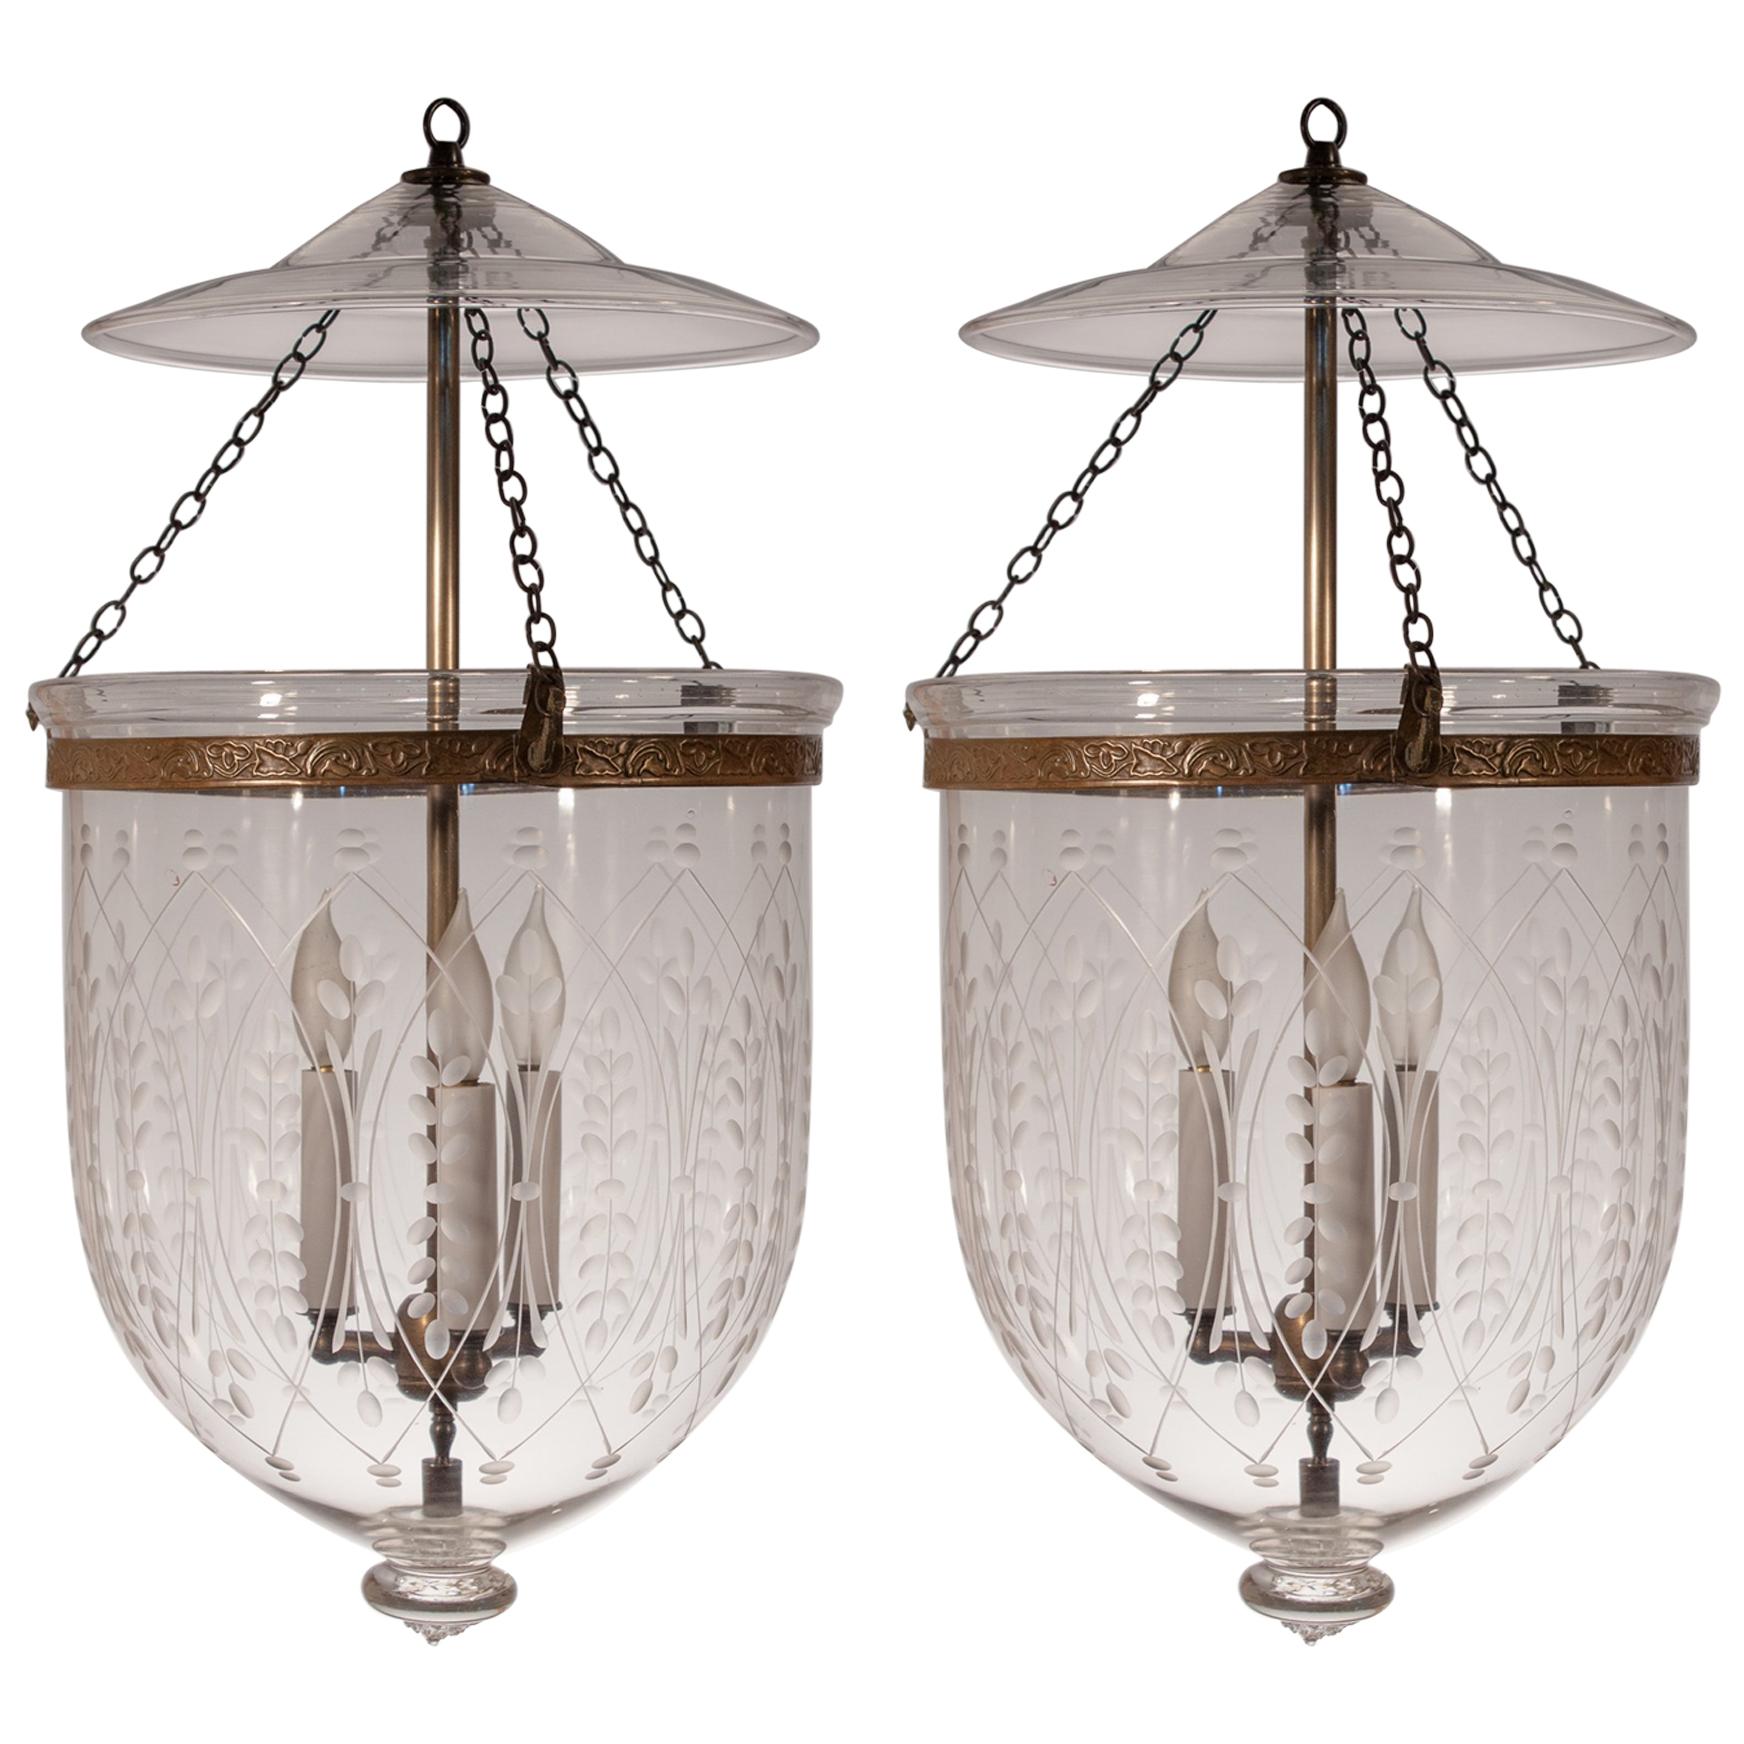 Pair of Large 19th Century Bell Jar Lanterns with Wheat Etching